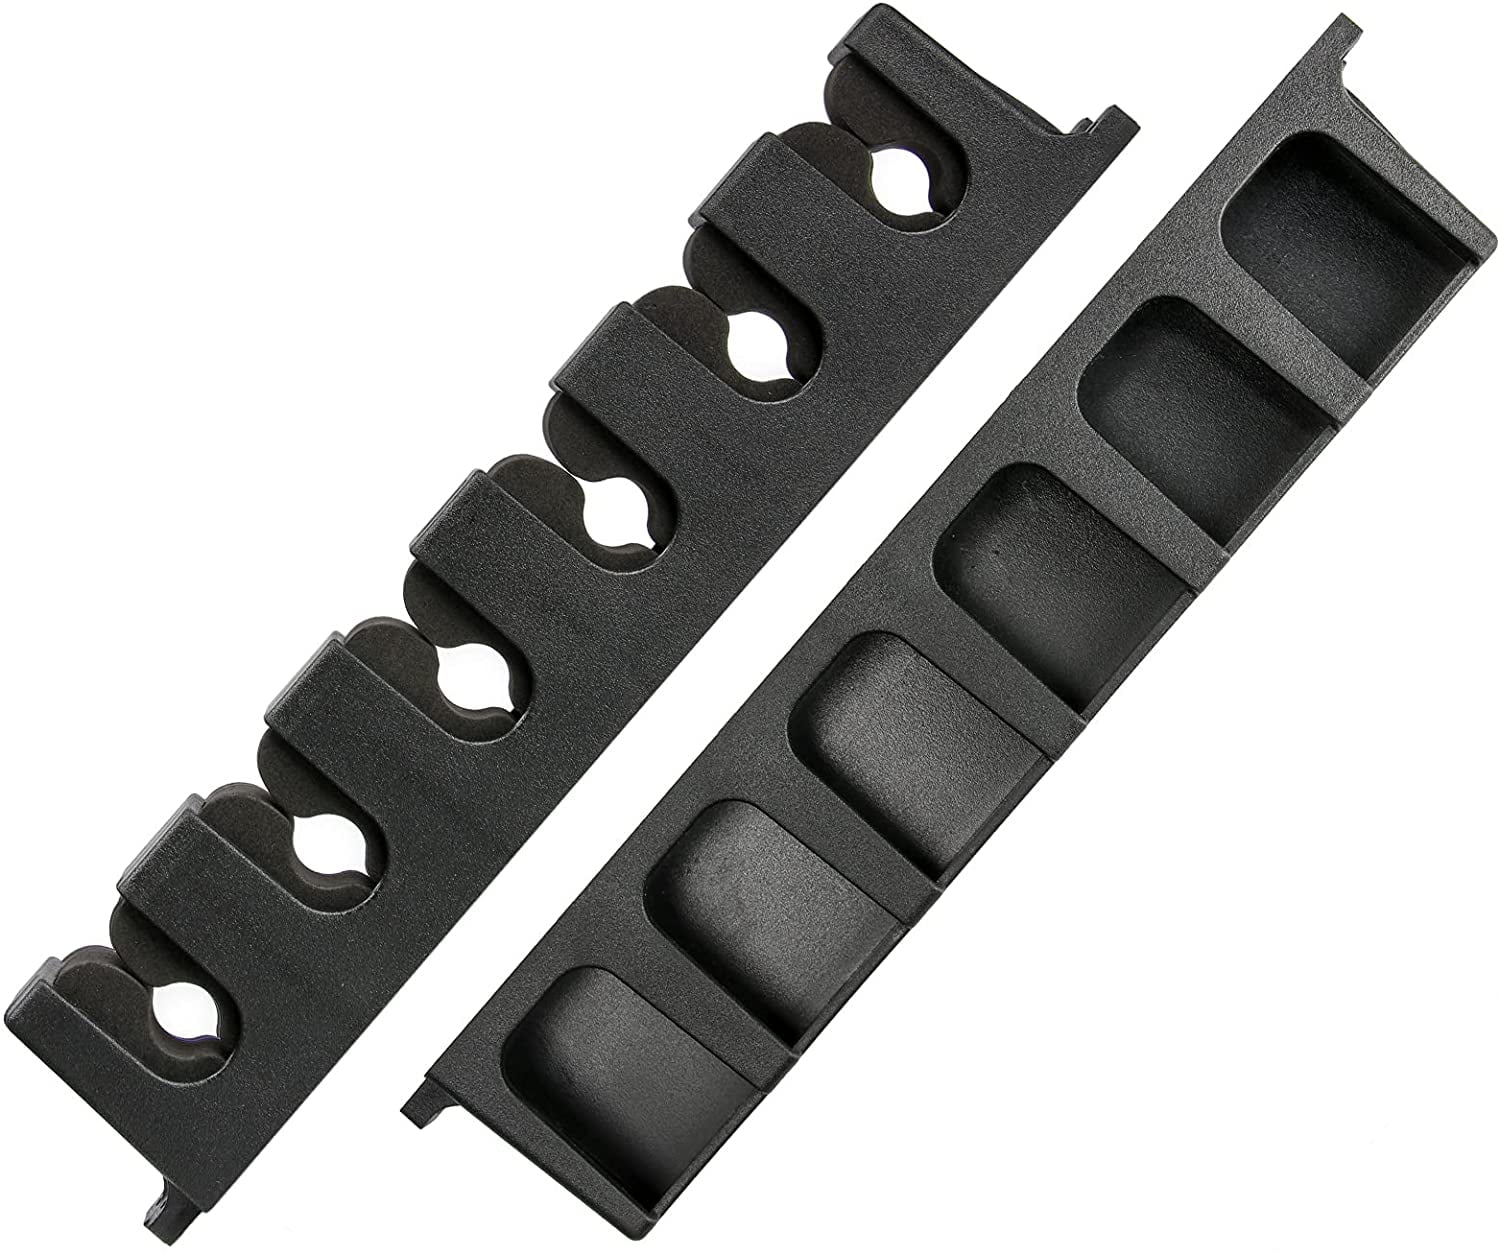 12PC Billiards Cue Rack Pool Stick Holder Clamp Wall Mount Hanger Clip Black New 